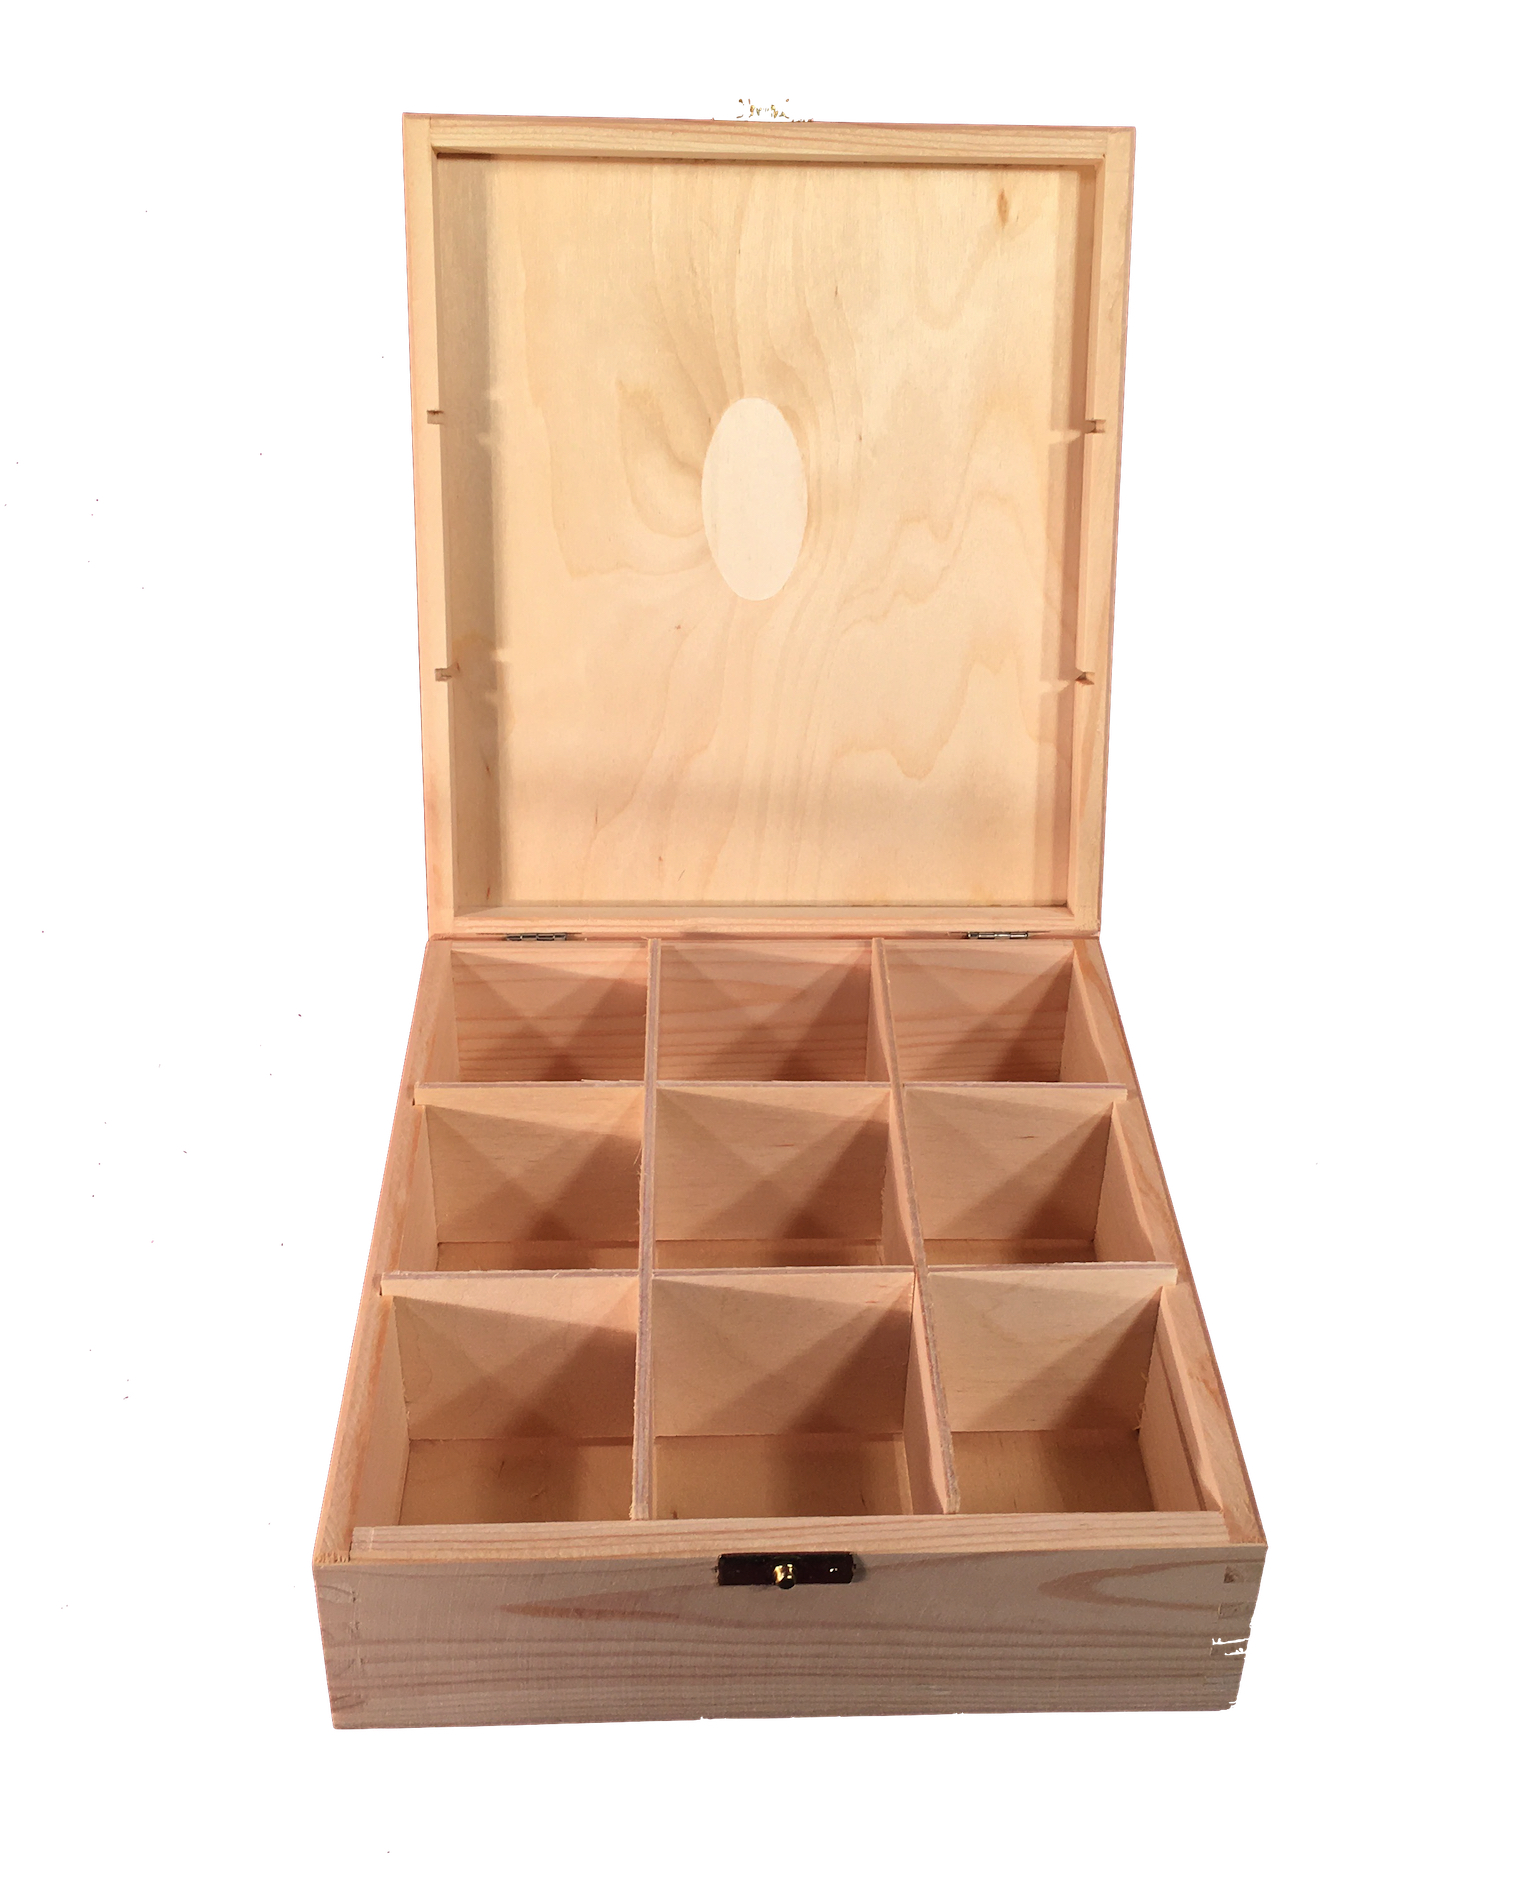 Tea Box Container 6 Compartments Natural Wood Woodeeworld 